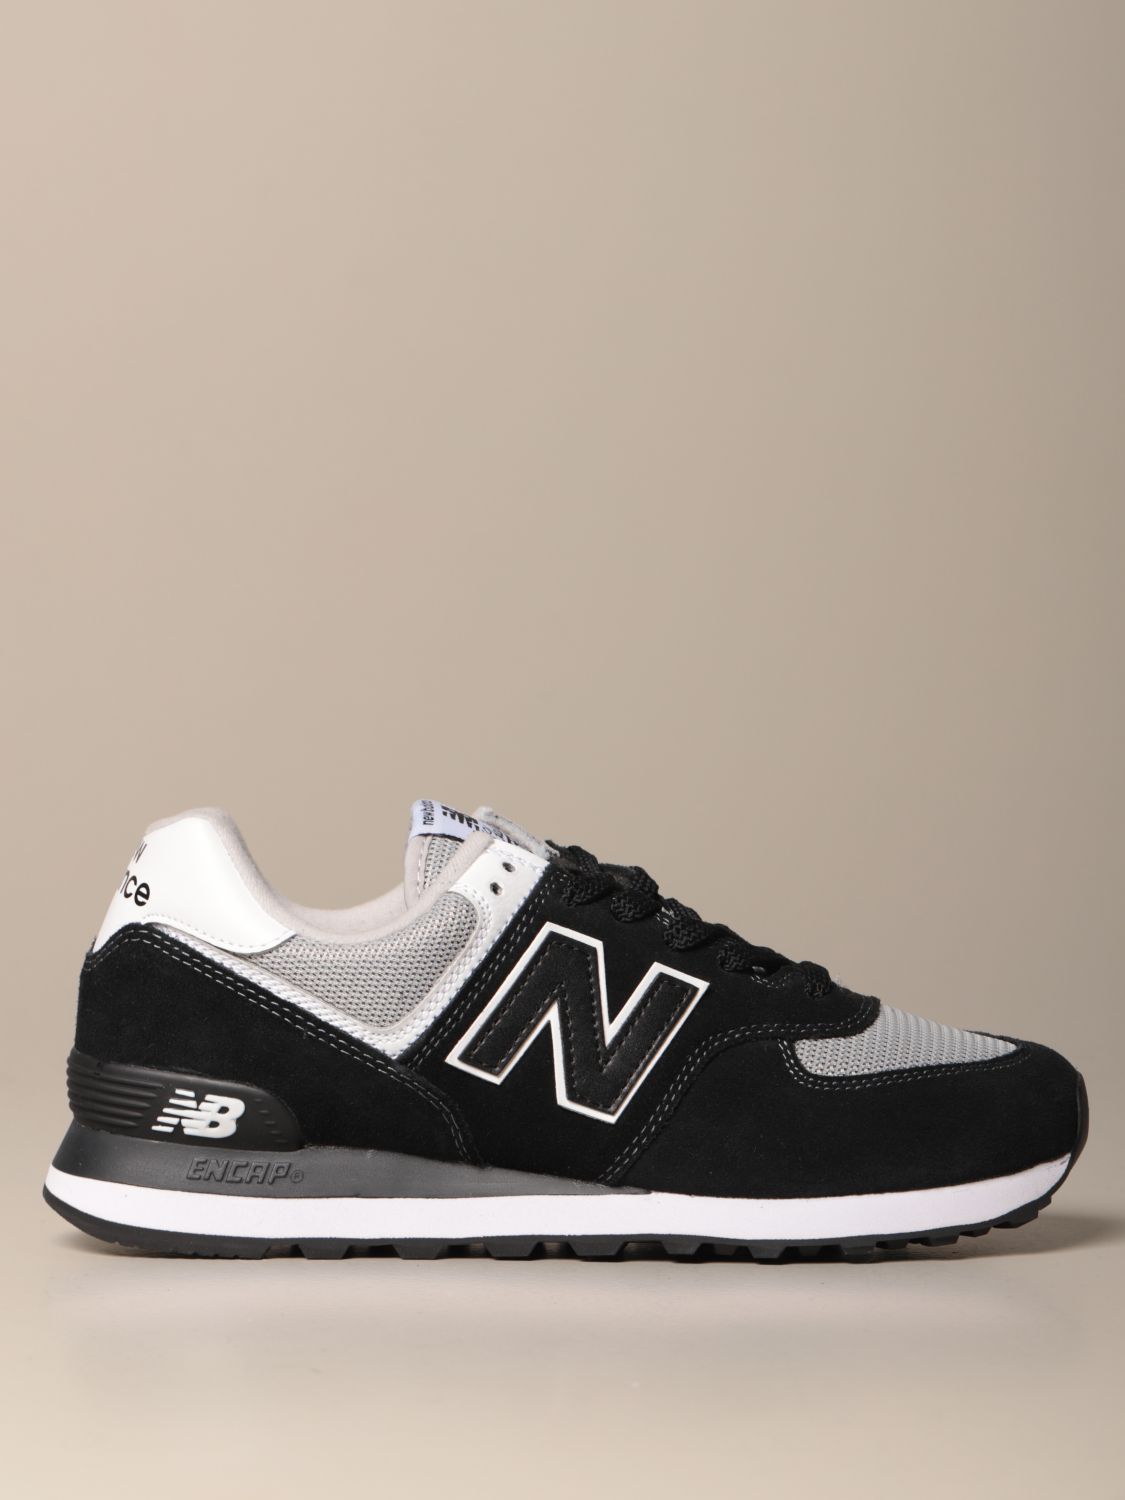 New Balance Outlet: Sneakers 574 in camoscio e mesh | Sneakers New ...